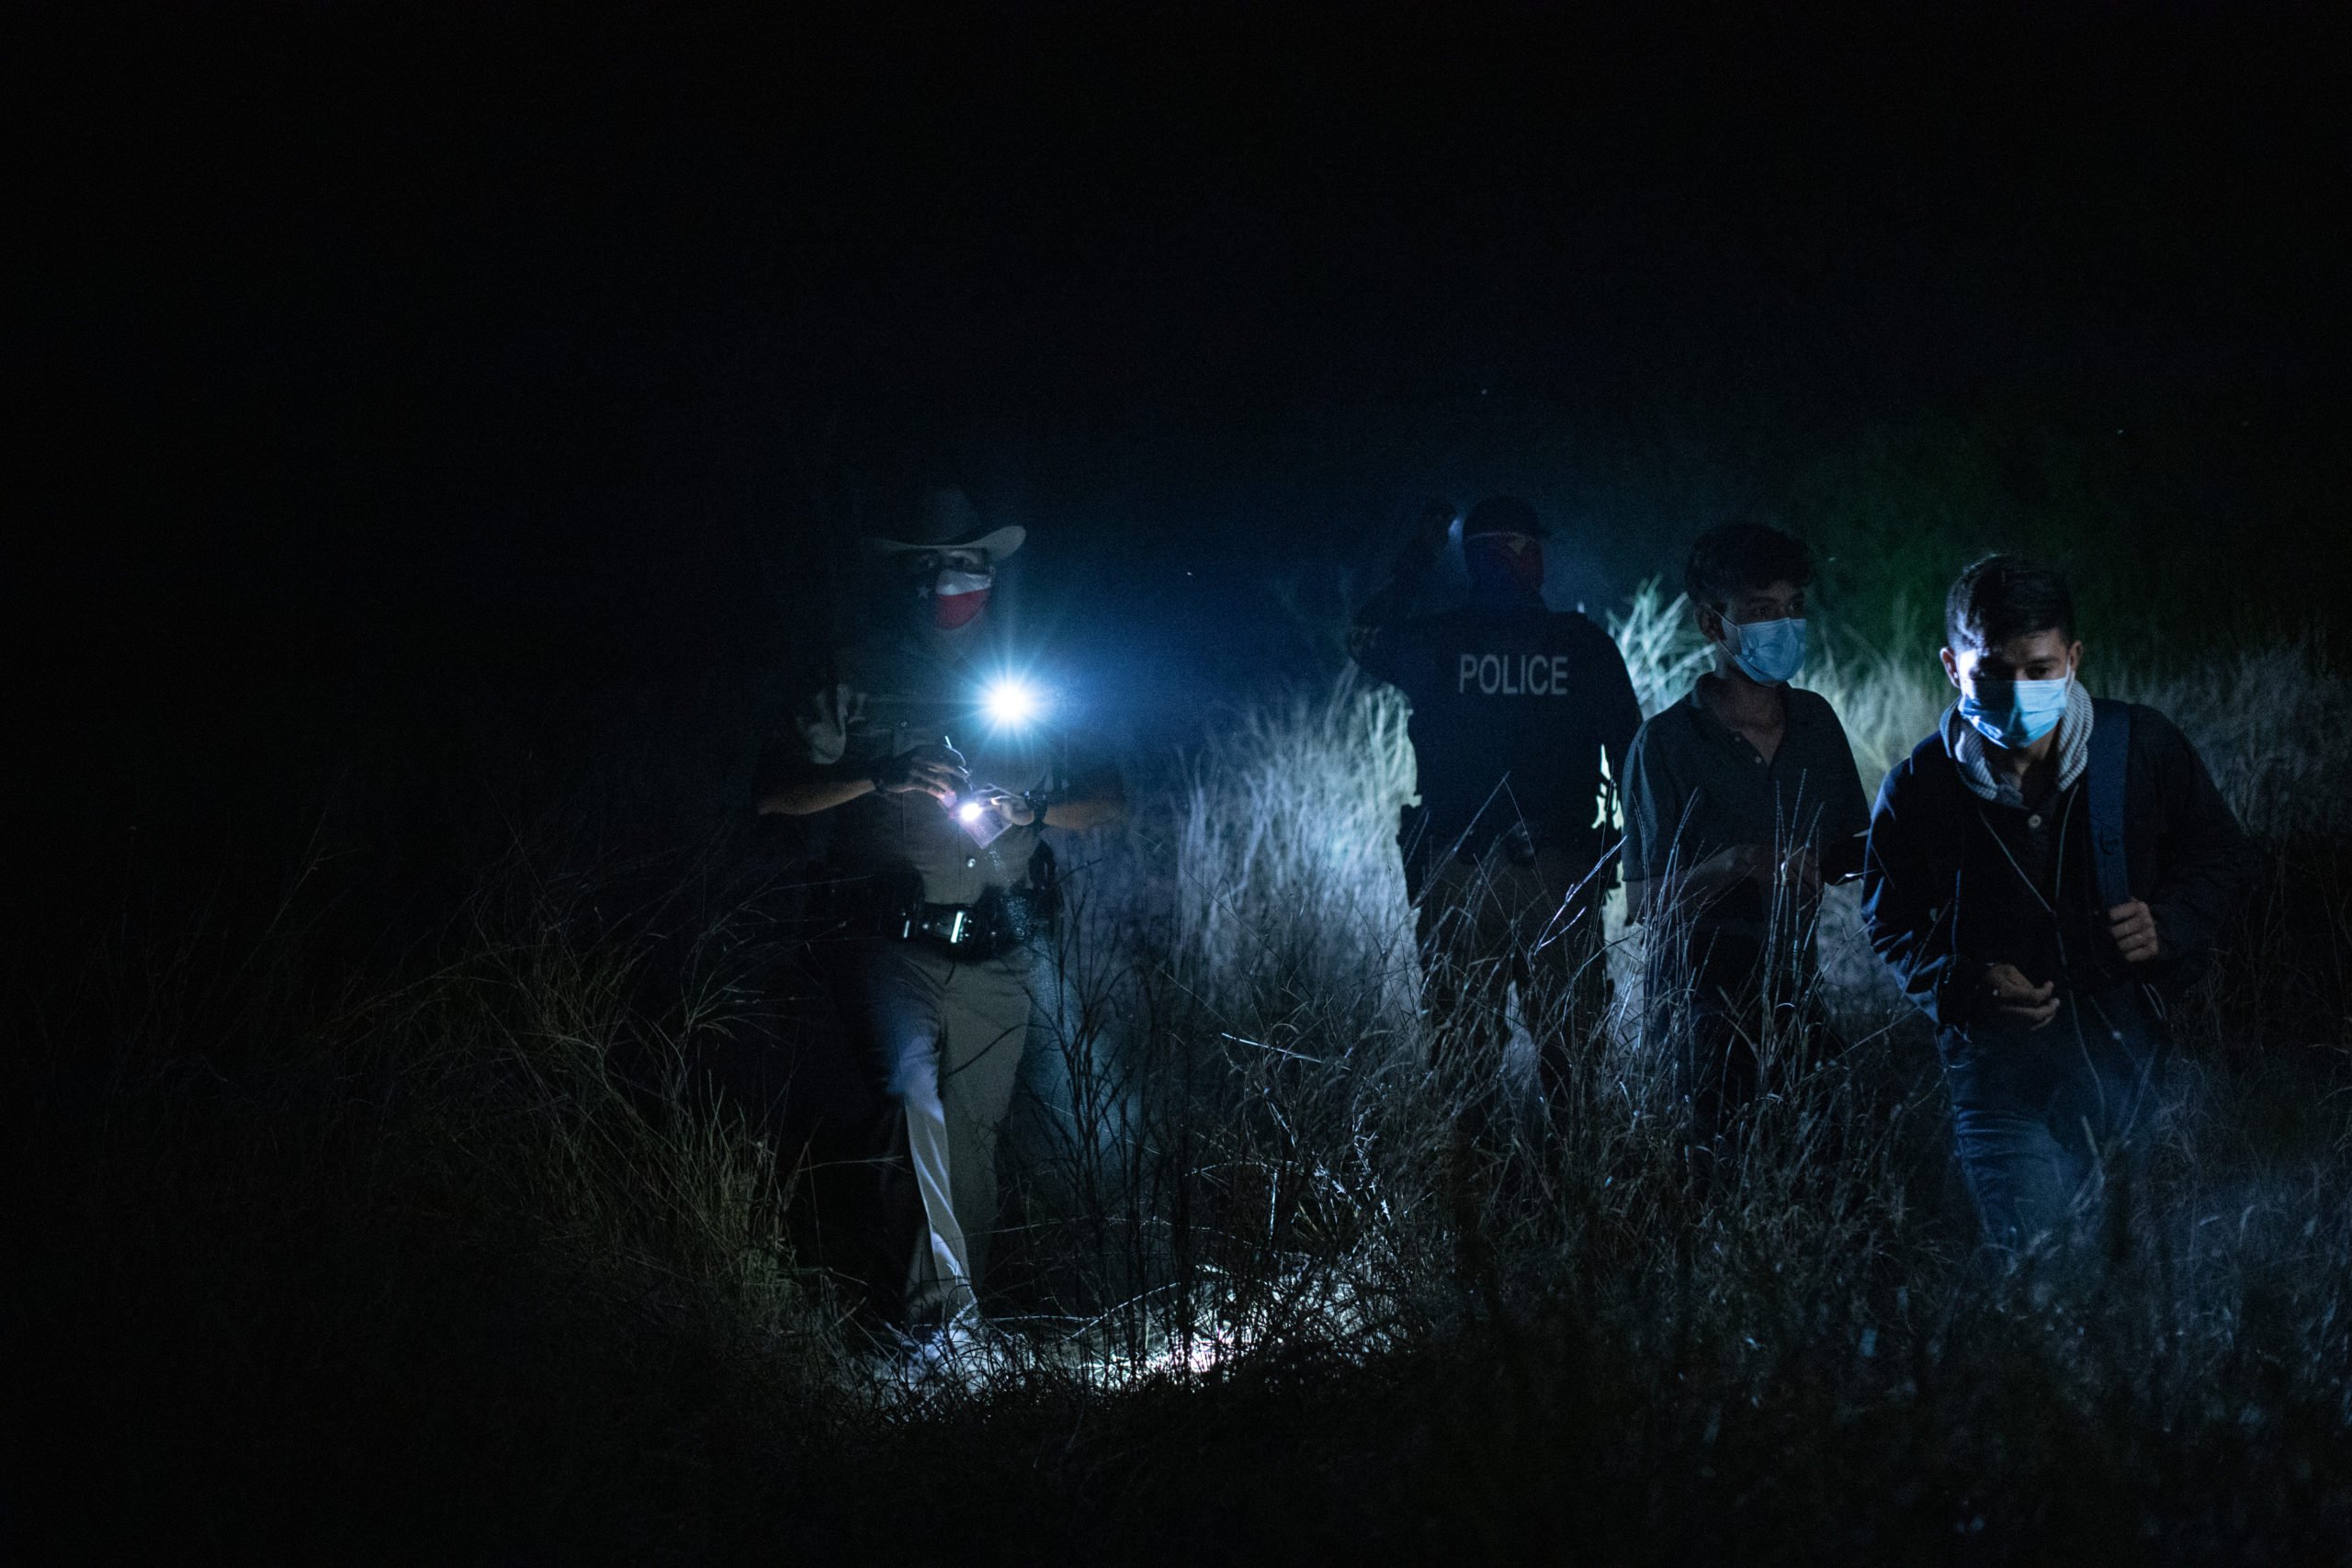 Texas state and local law enforcement officials helped a group migrants cross over a barbed wire fence and line of train tracks after they illegally entered the U.S. near La Joya, Texas on March 25, 2021. (Kaylee Greenlee - Daily Caller News Foundation)